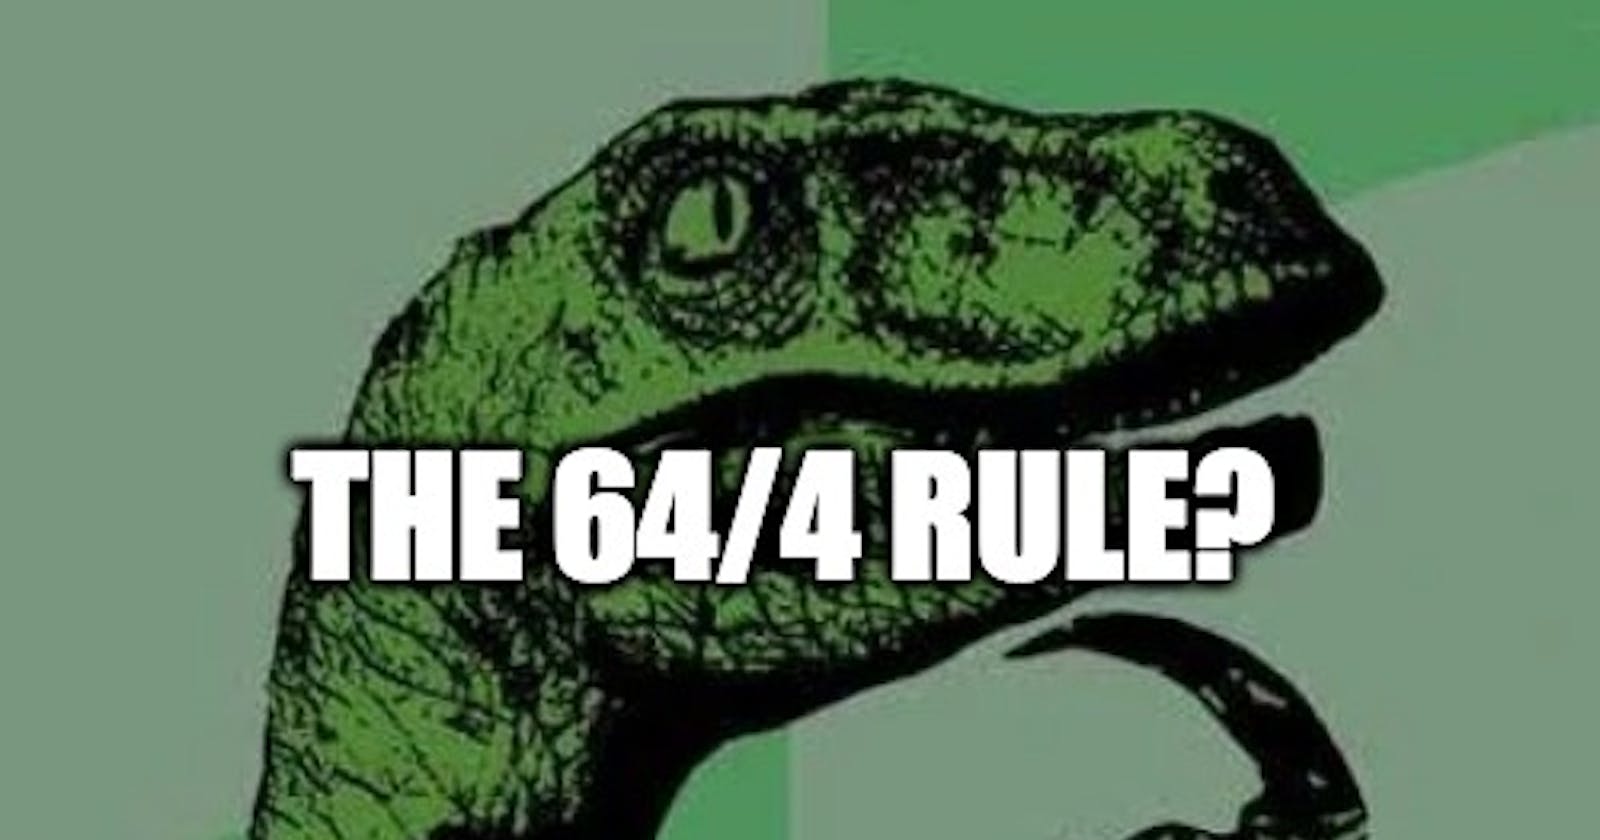 The 64/4 law